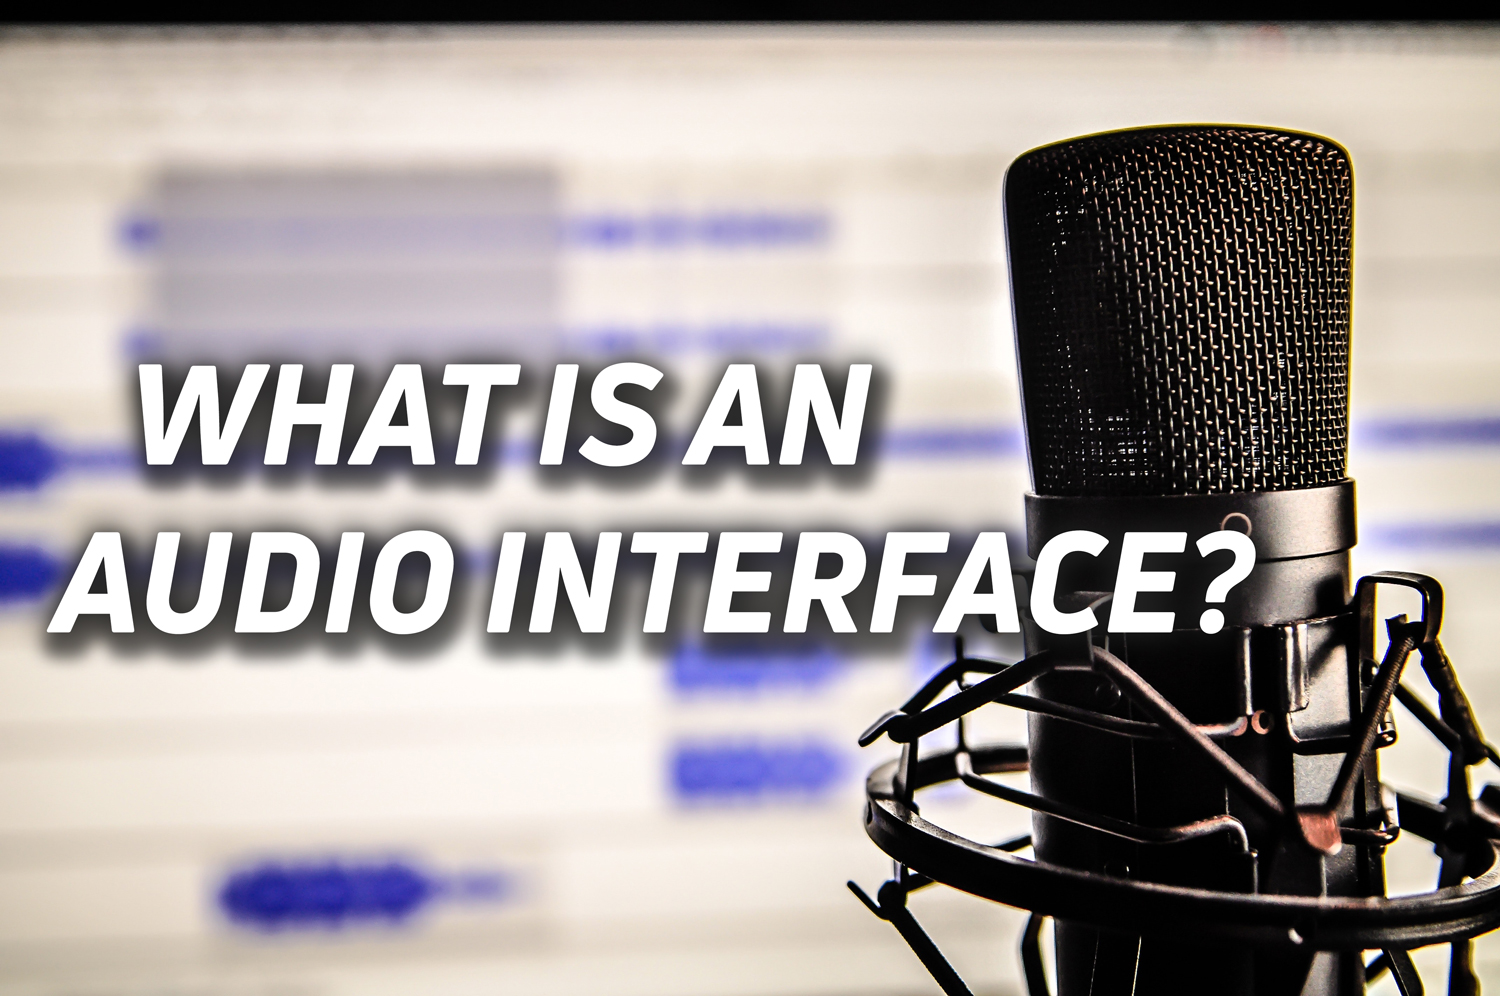 An image of a microphone in front of a computer, with overlaid text reading "what is an audio interface?"